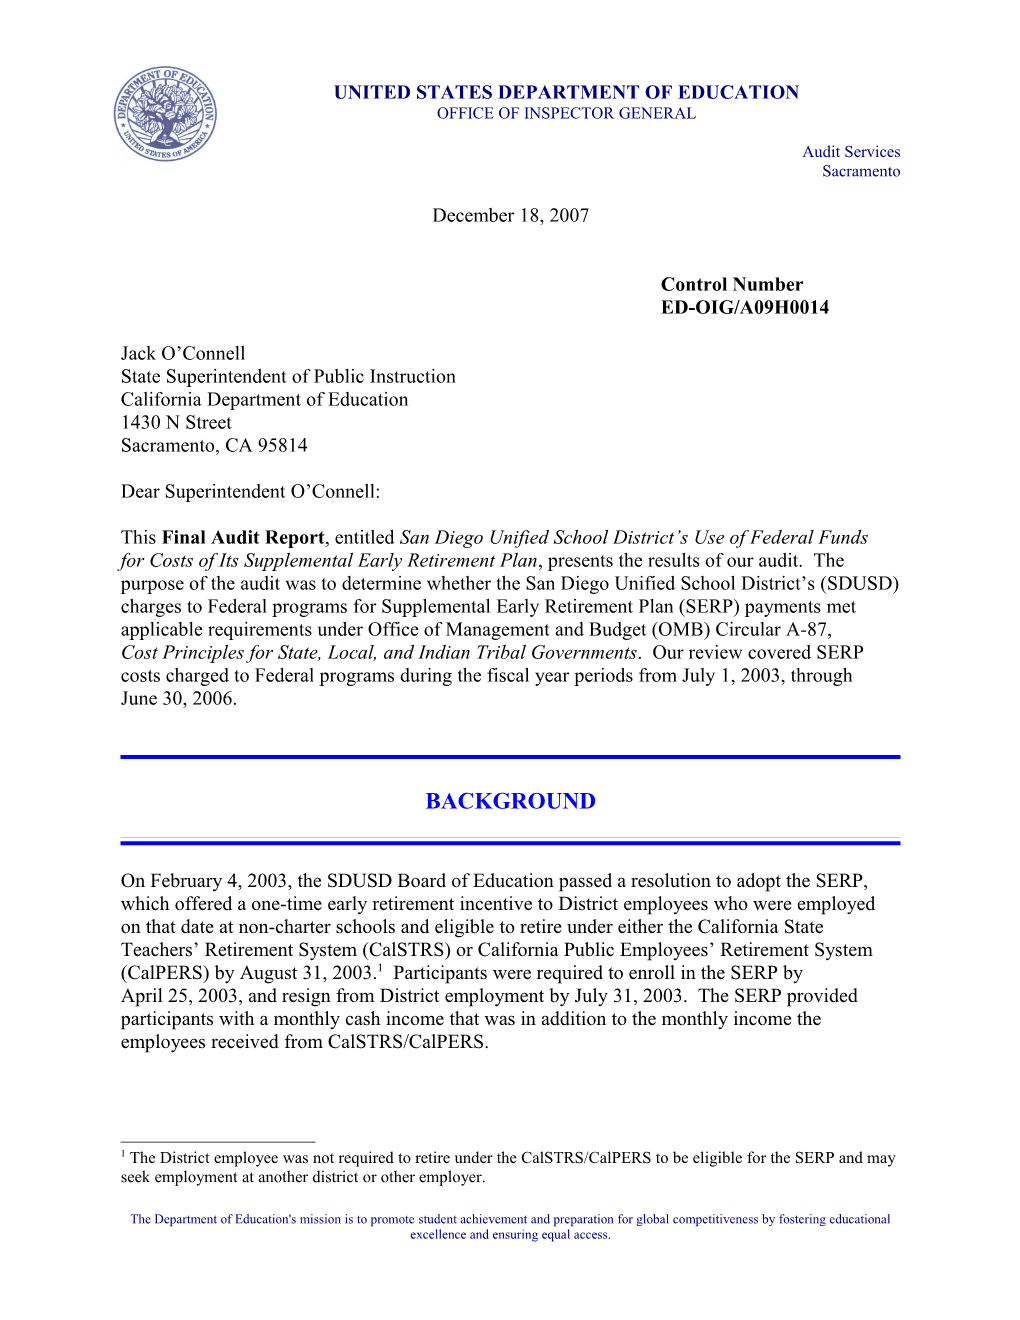 Audit A09H0014 - San Diego Unified School District's Use of Federal Funds for Costs Of